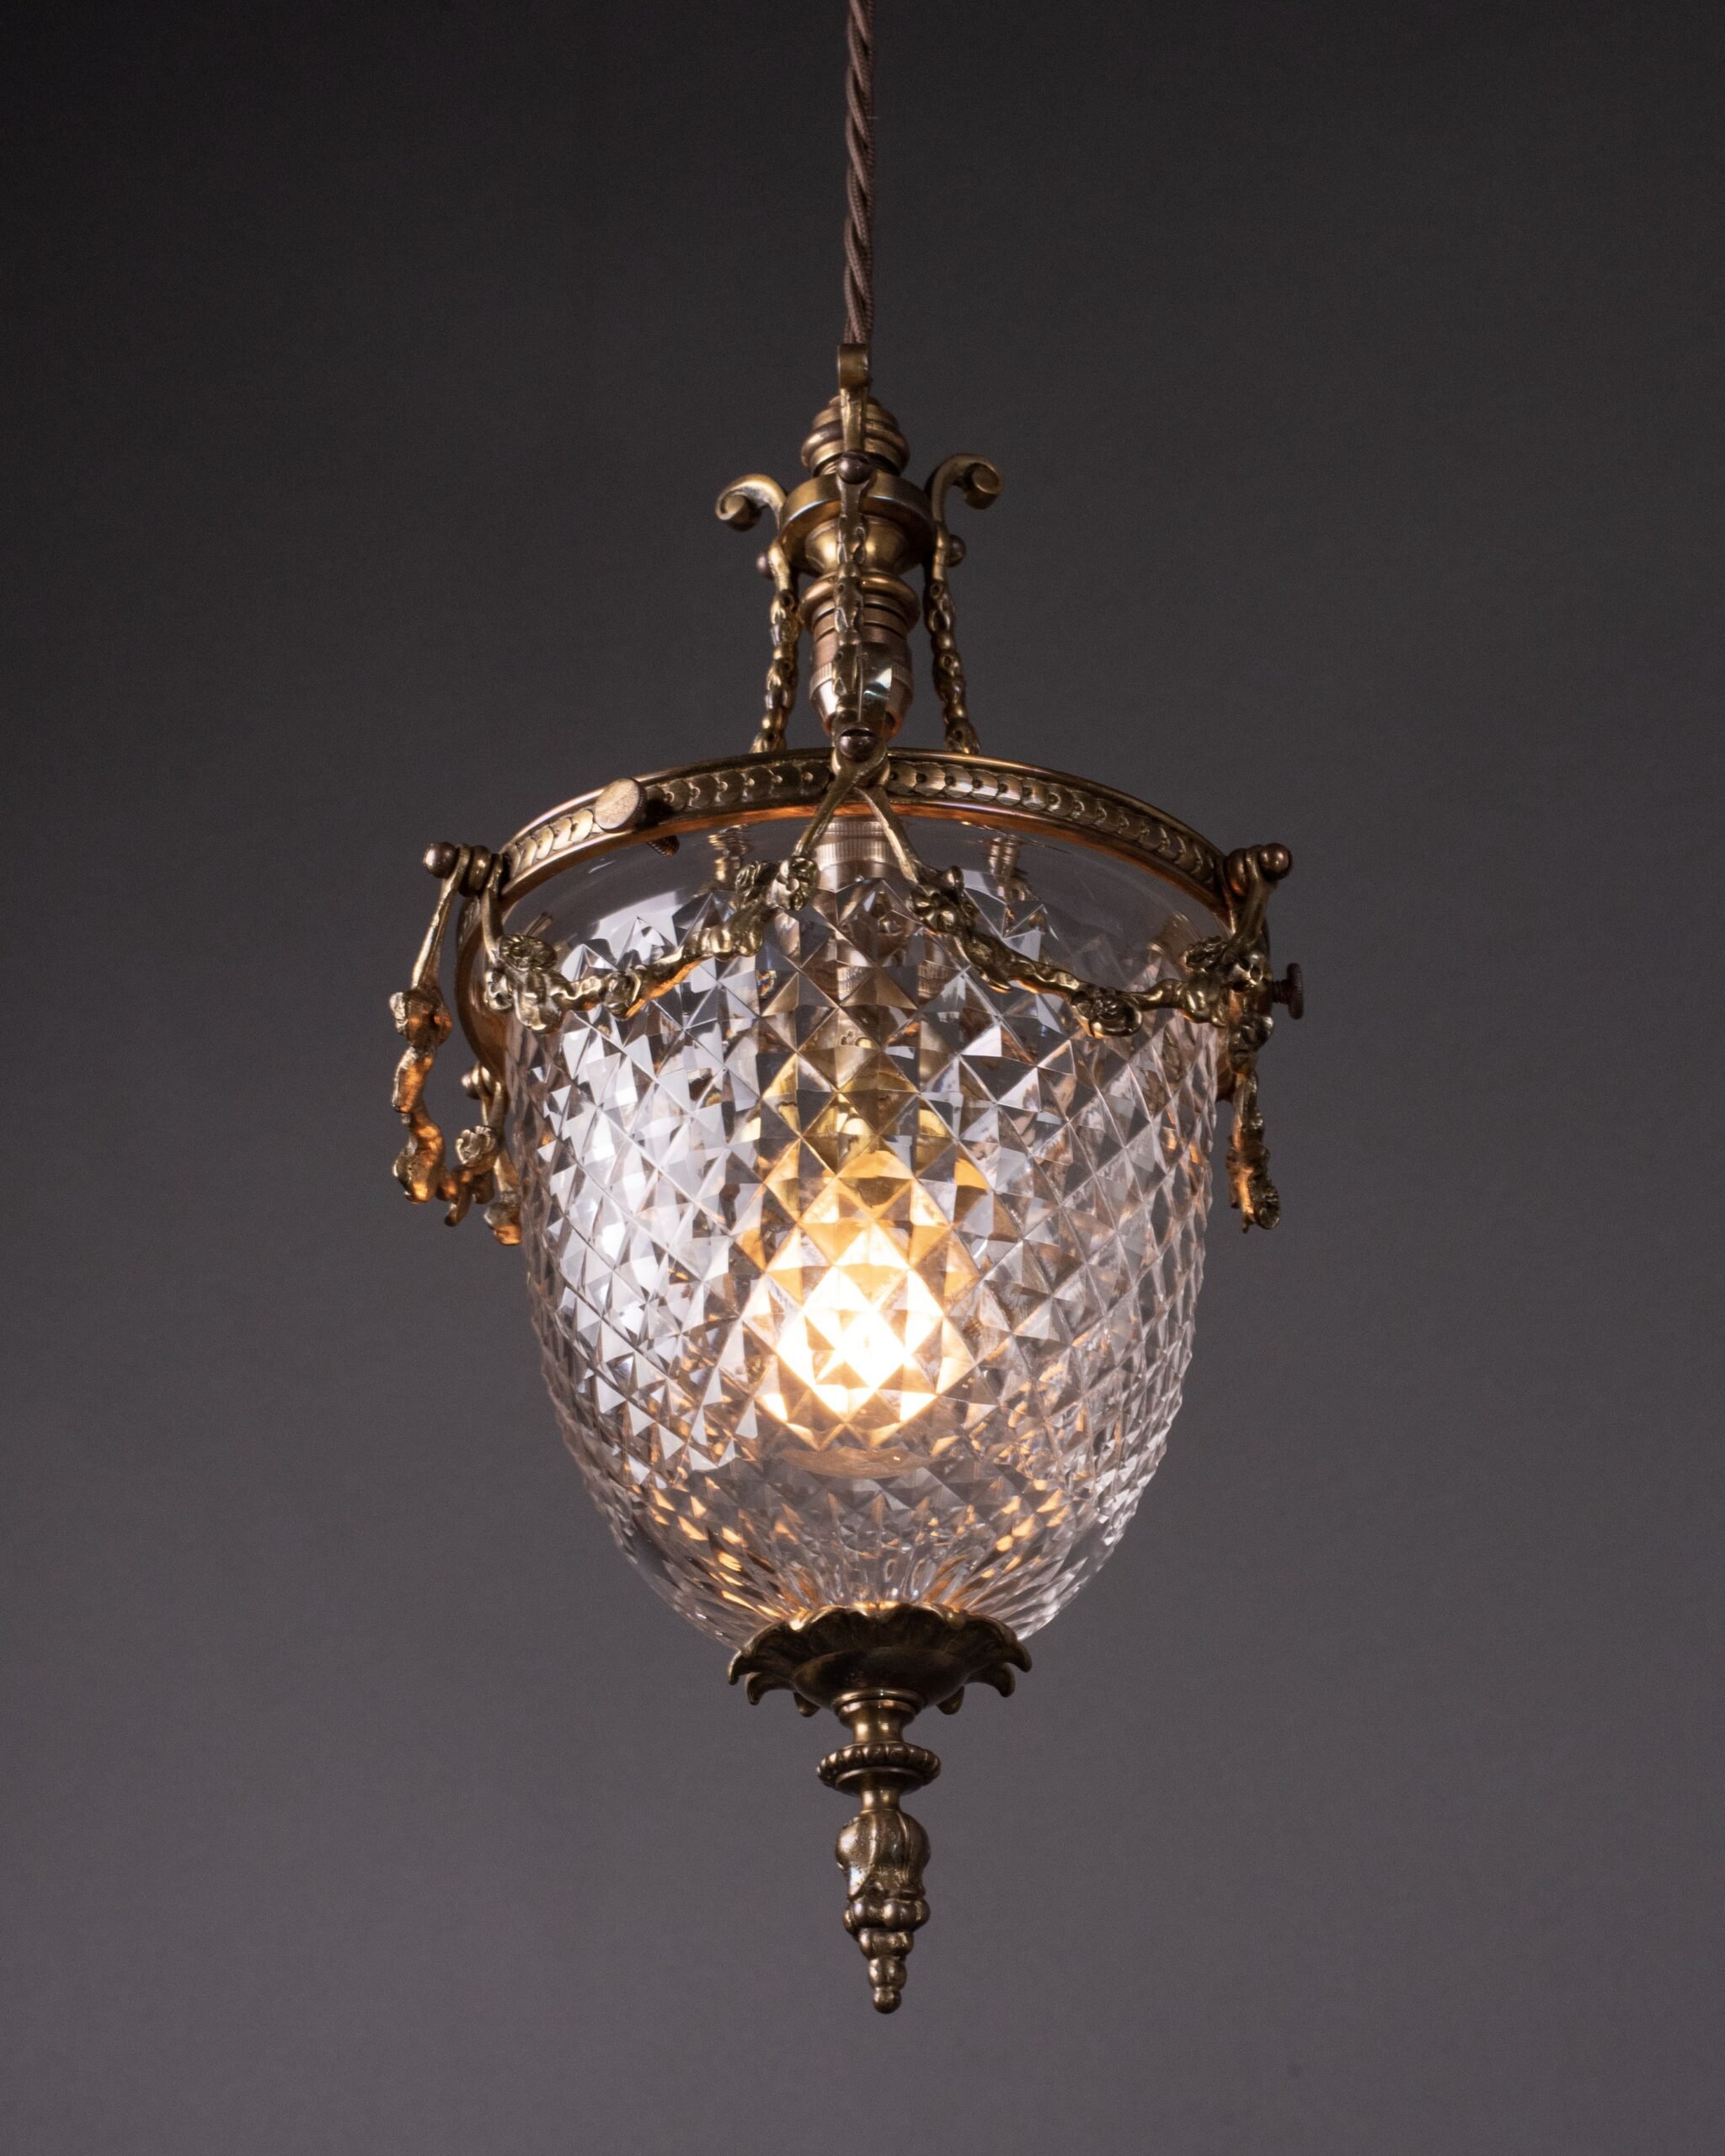 Osler Antique Brass Ceiling Light with Hobnail Cut Glass Shade 3